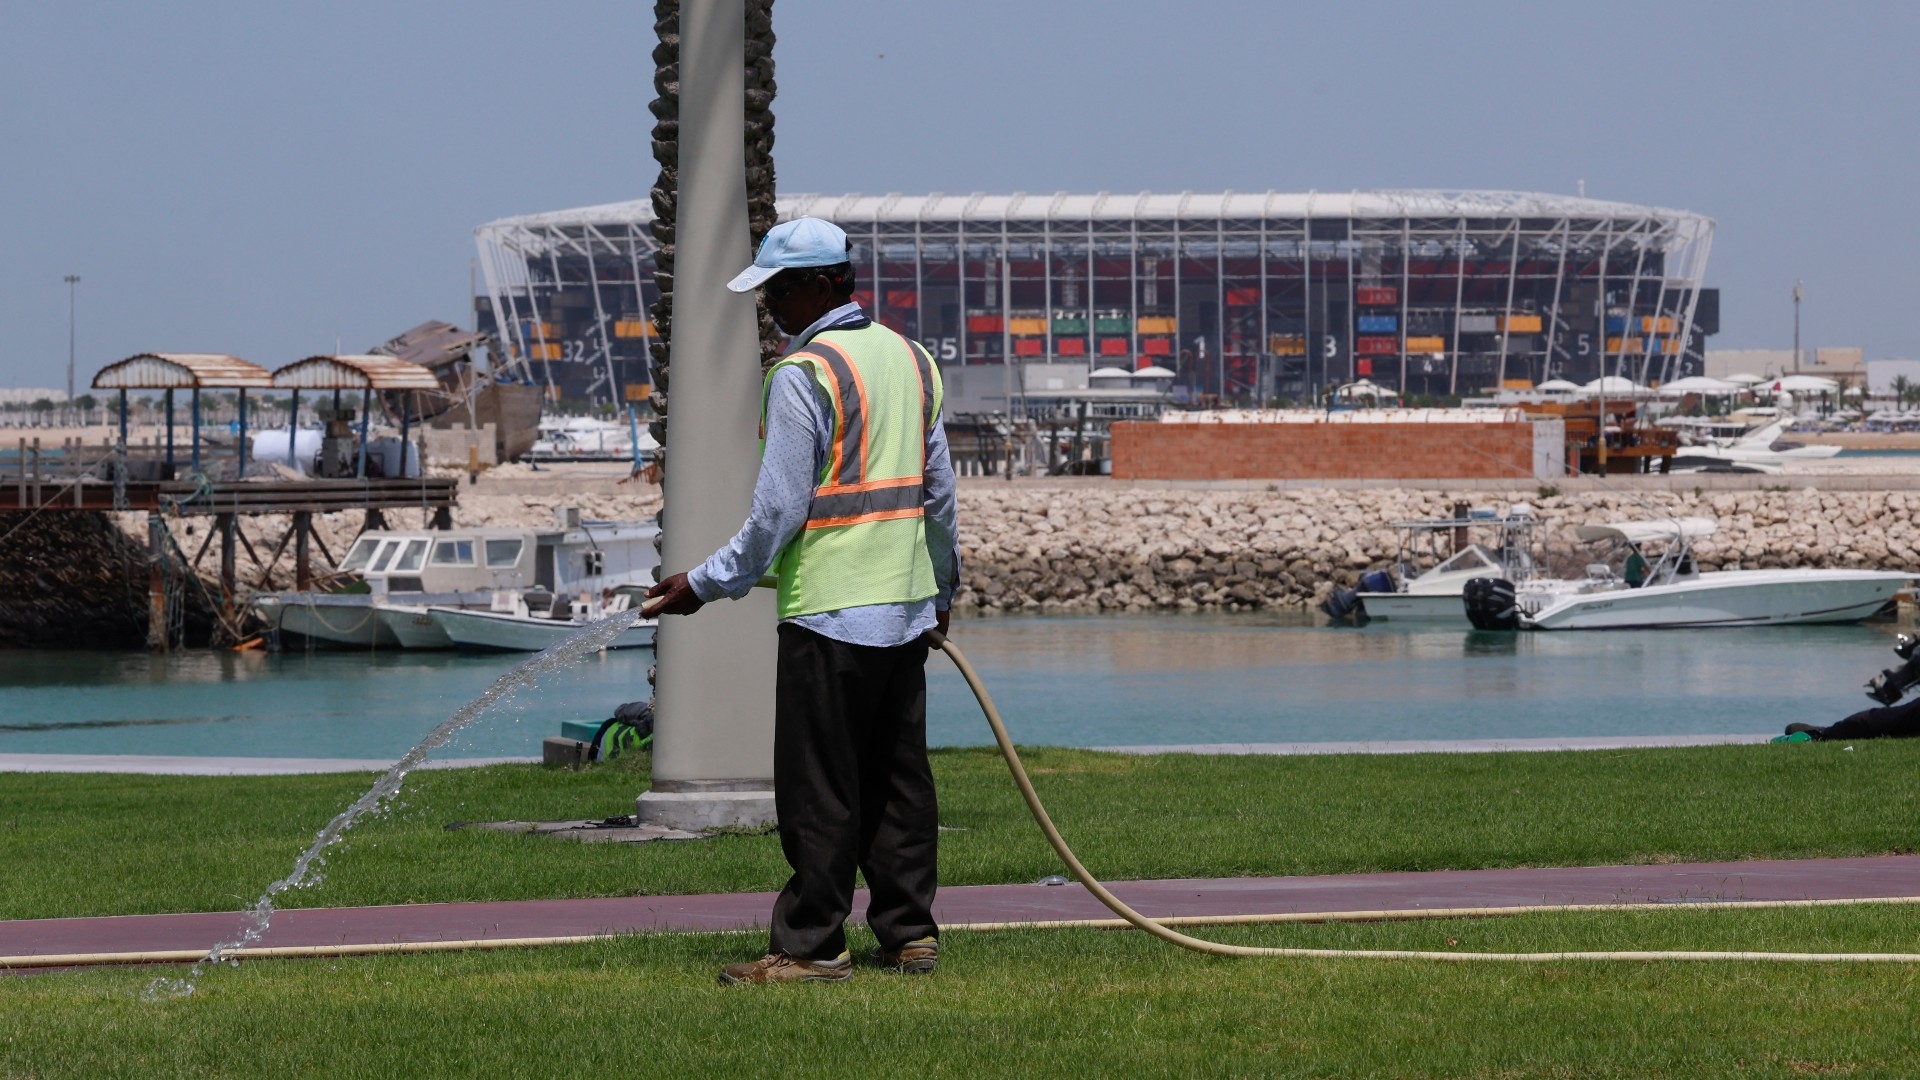 A worker waters the grass near Stadium 974 in Doha, Qatar on 10 May 2023 (AFP)